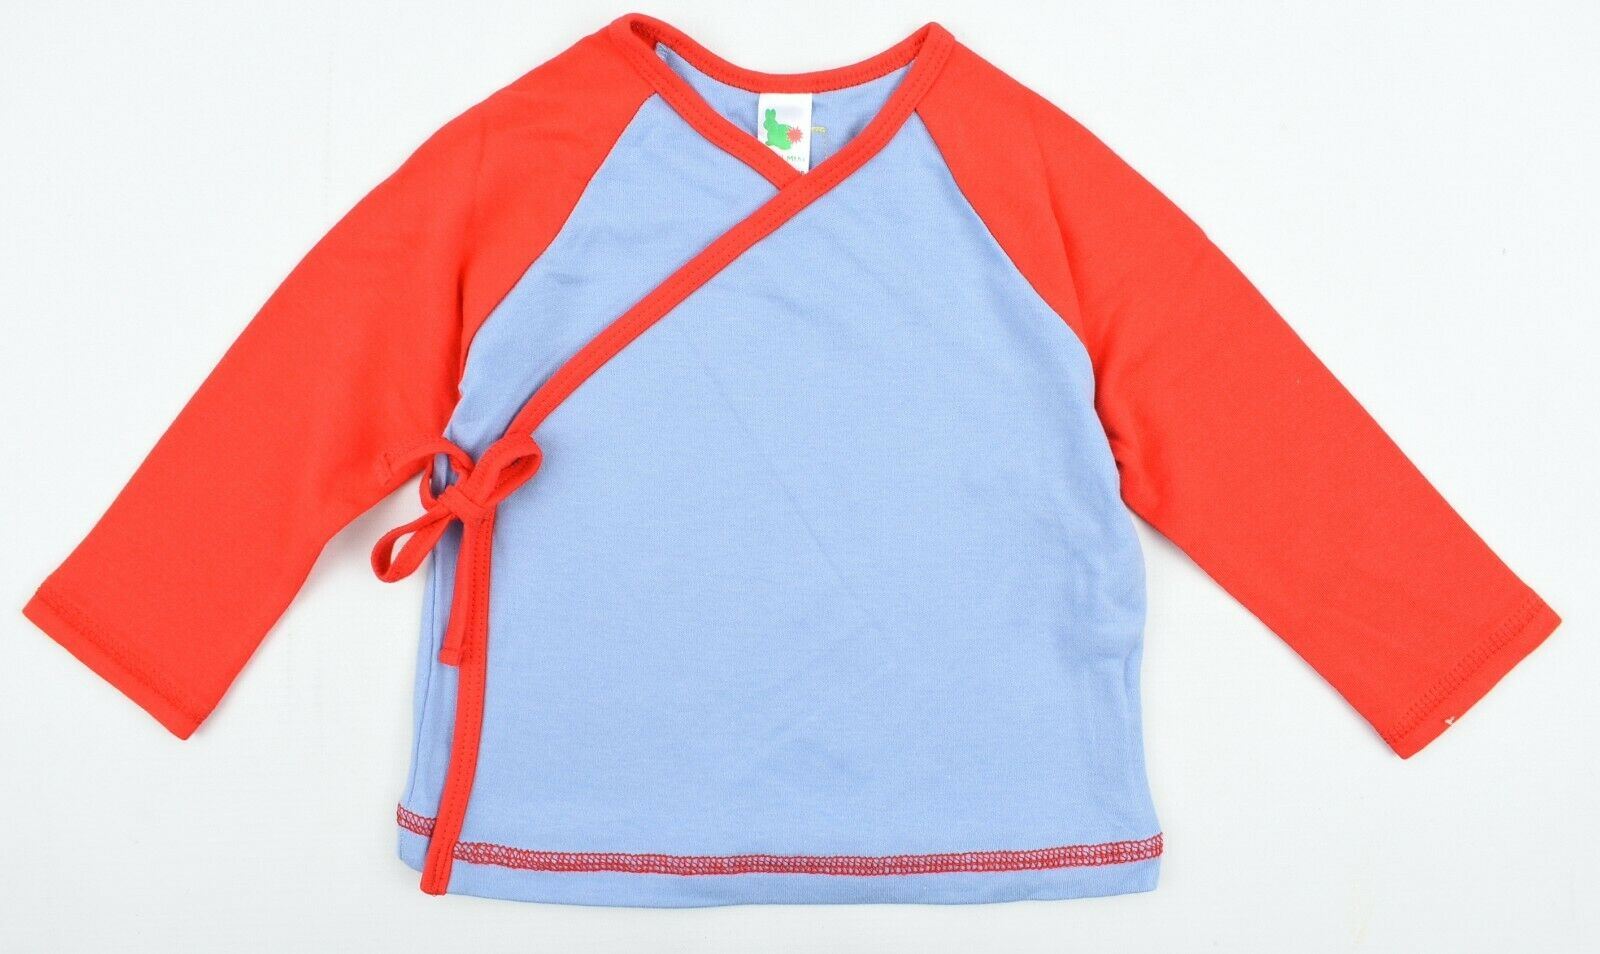 GREEN RABBIT Baby Wrap Around Cotton Top, Red/Blue, MADE IN UK size 18-24 months